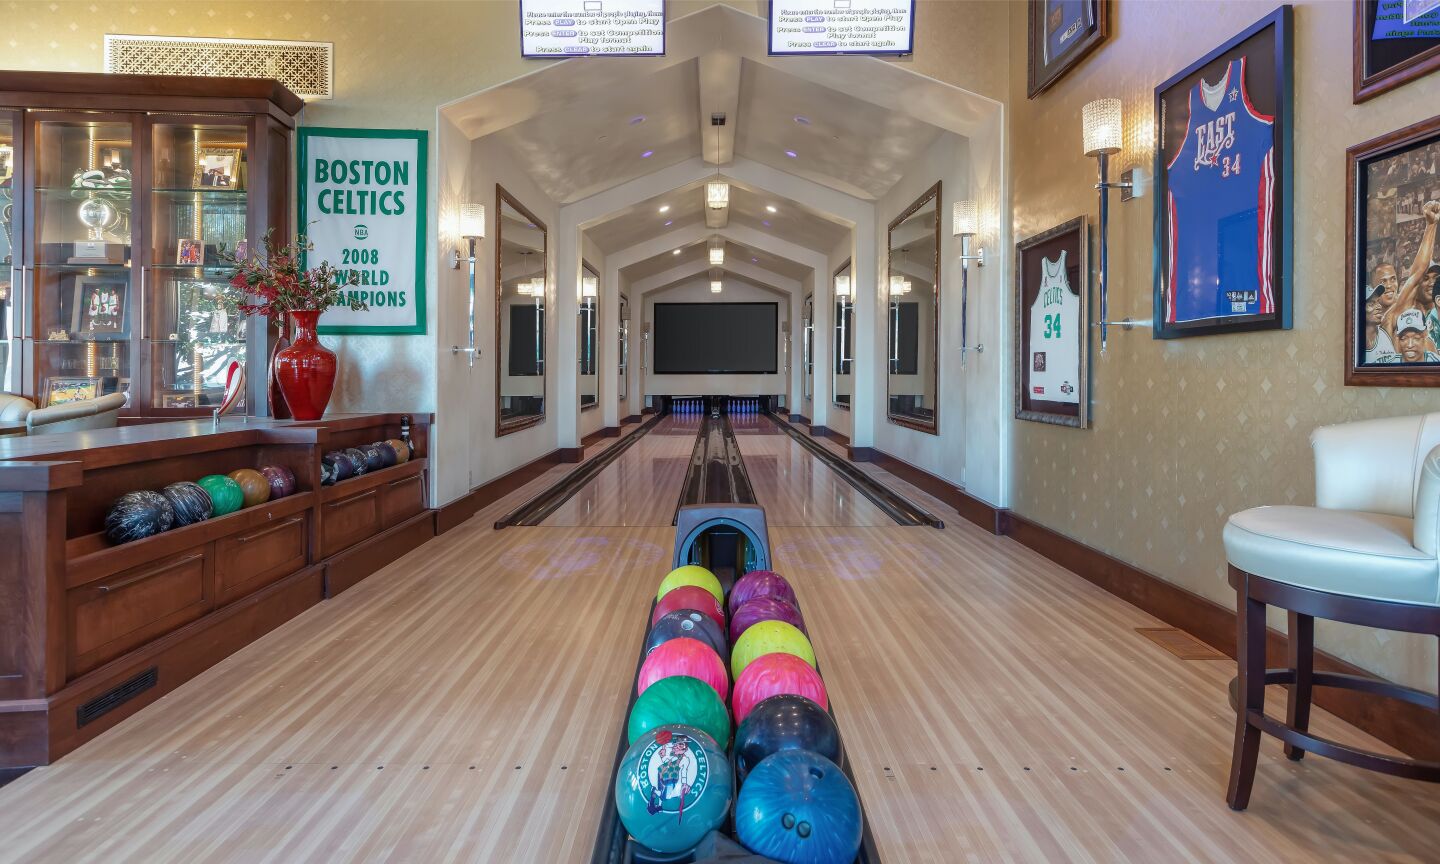 The bowling alley.